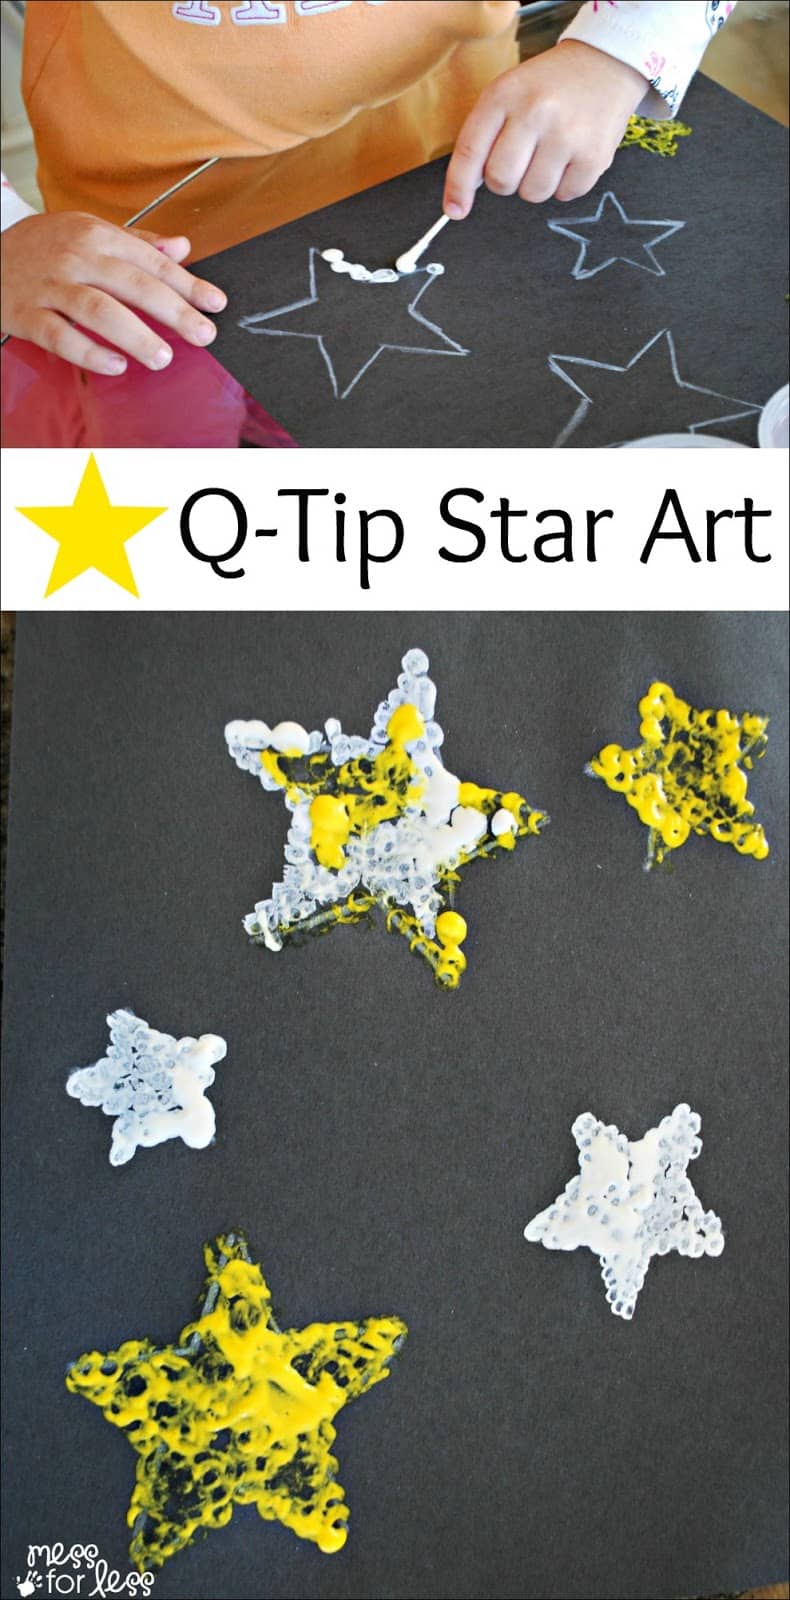 Kids Art Project - Q-Tip Star Art: A creative way for kids to paint with a q-tip. This also provides a fun fine motor experience for kids. What a fun way to paint!